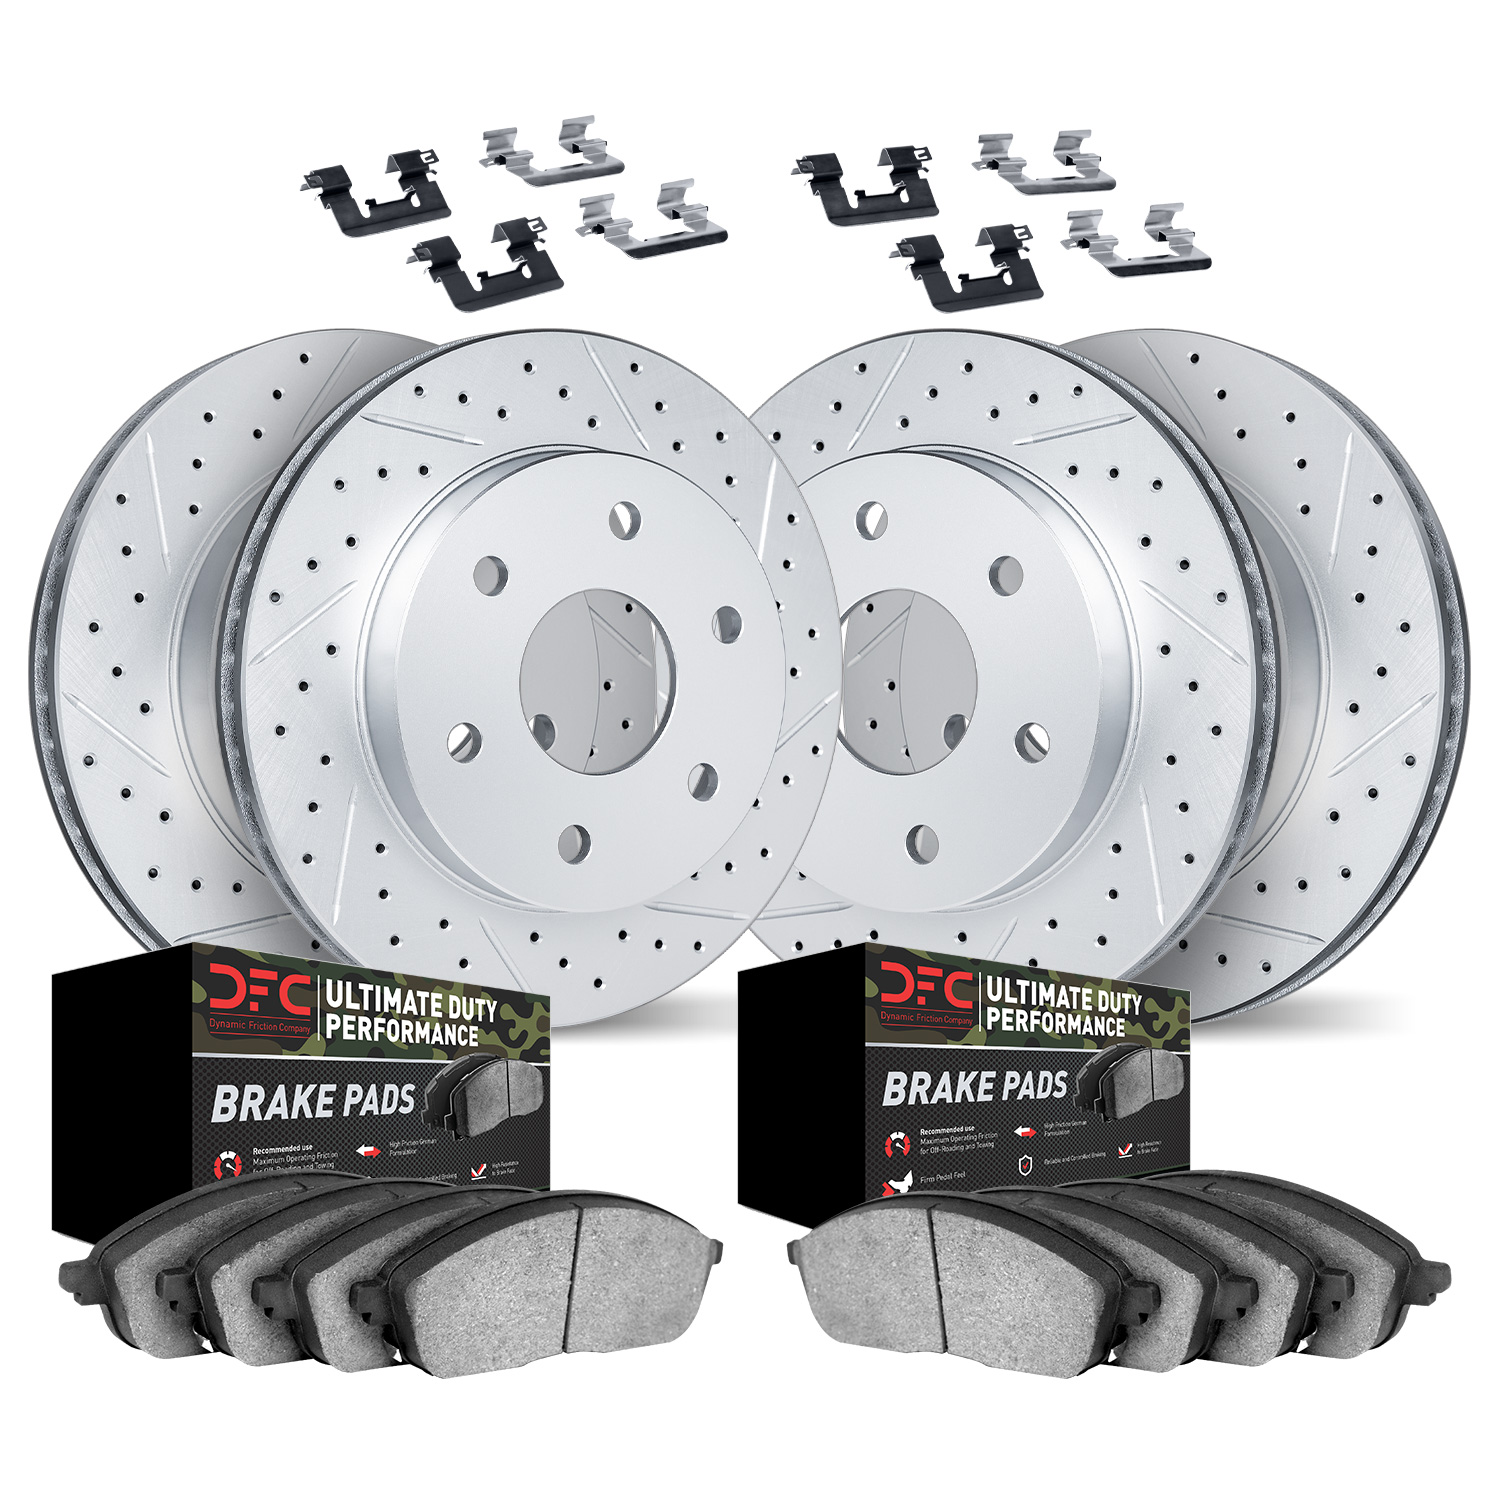 2414-67005 Geoperformance Drilled/Slotted Brake Rotors with Ultimate-Duty Brake Pads Kit & Hardware, Fits Select Infiniti/Nissan